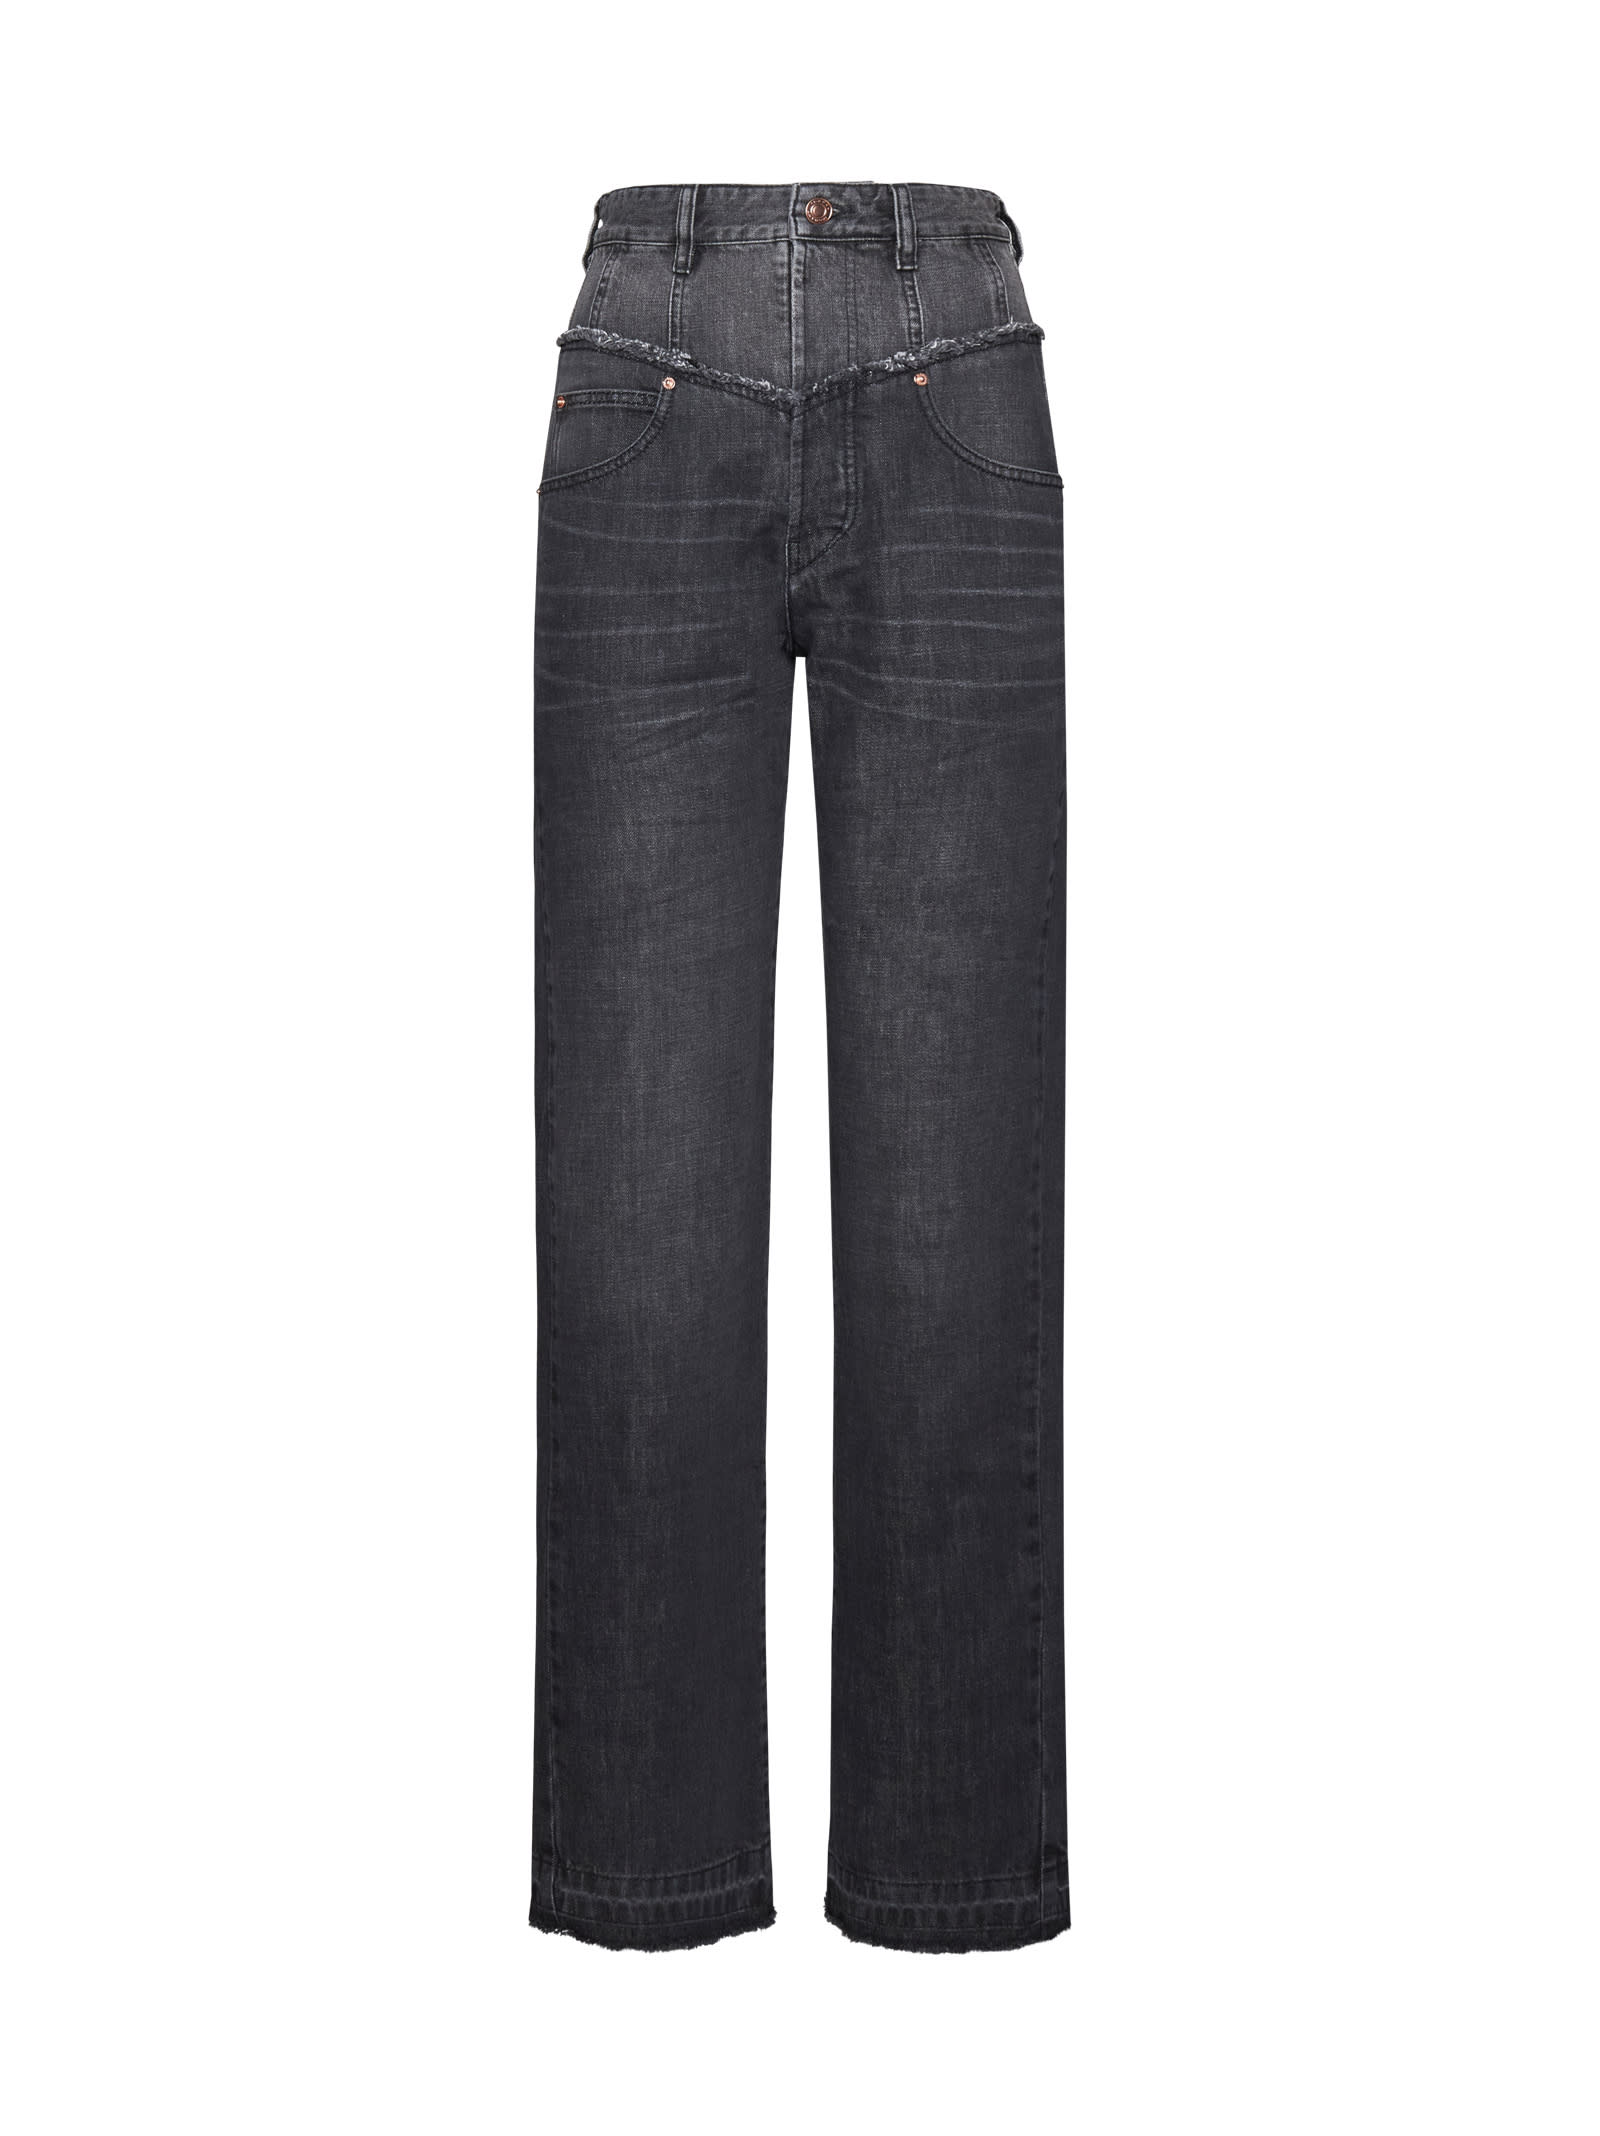 Isabel Marant Jeans In Faded Black